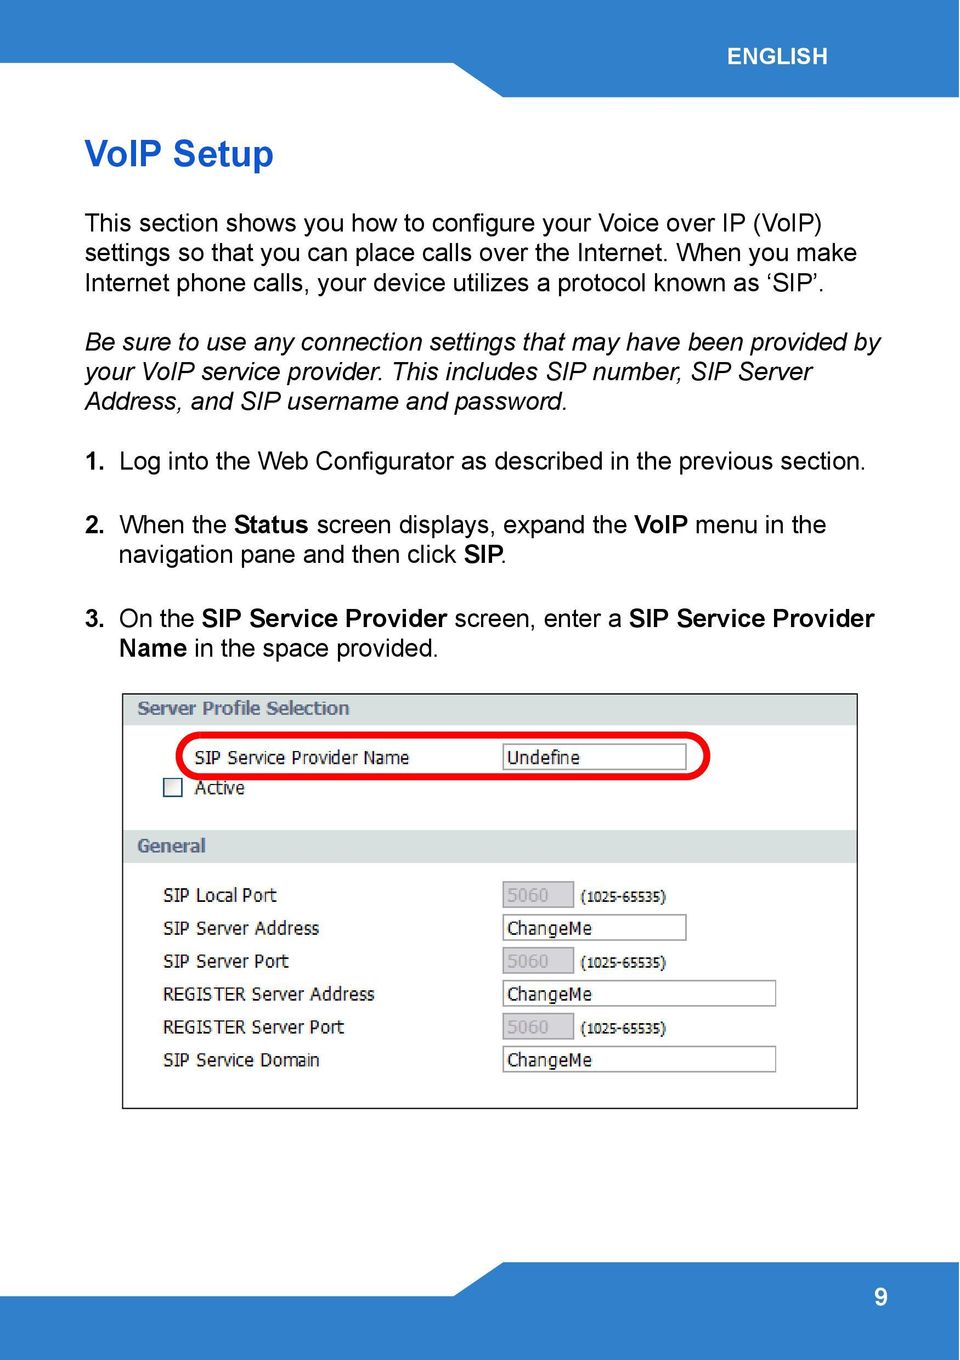 Be sure to use any connection settings that may have been provided by your VoIP service provider.